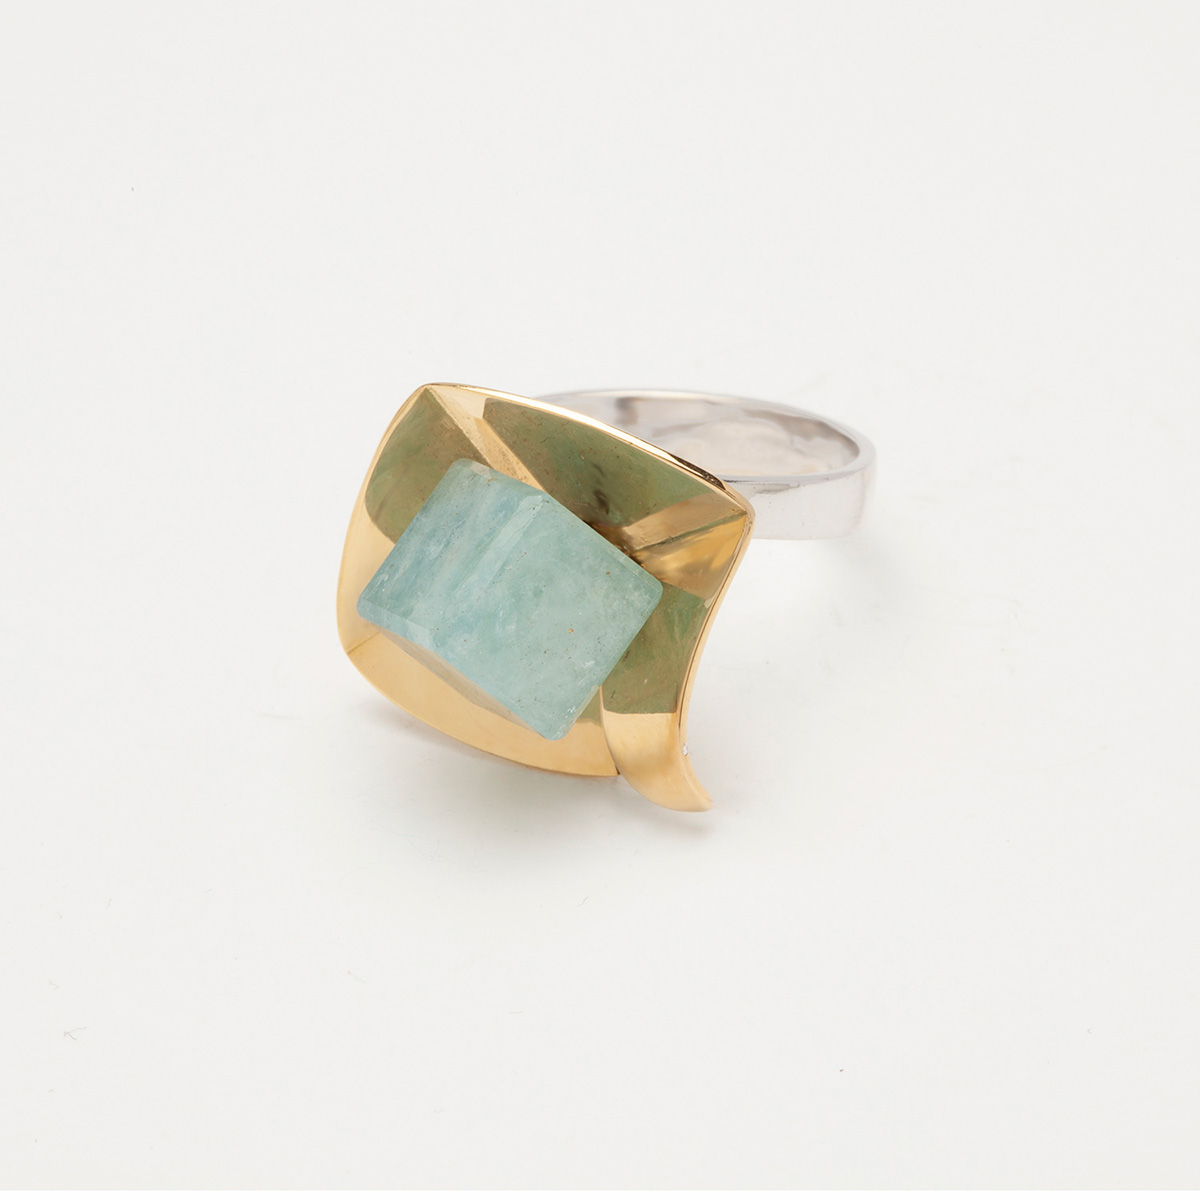 Gio handmade ring in 9k or 18k gold, sterling silver and milk aquamarine designed 2 by Belen Bajo